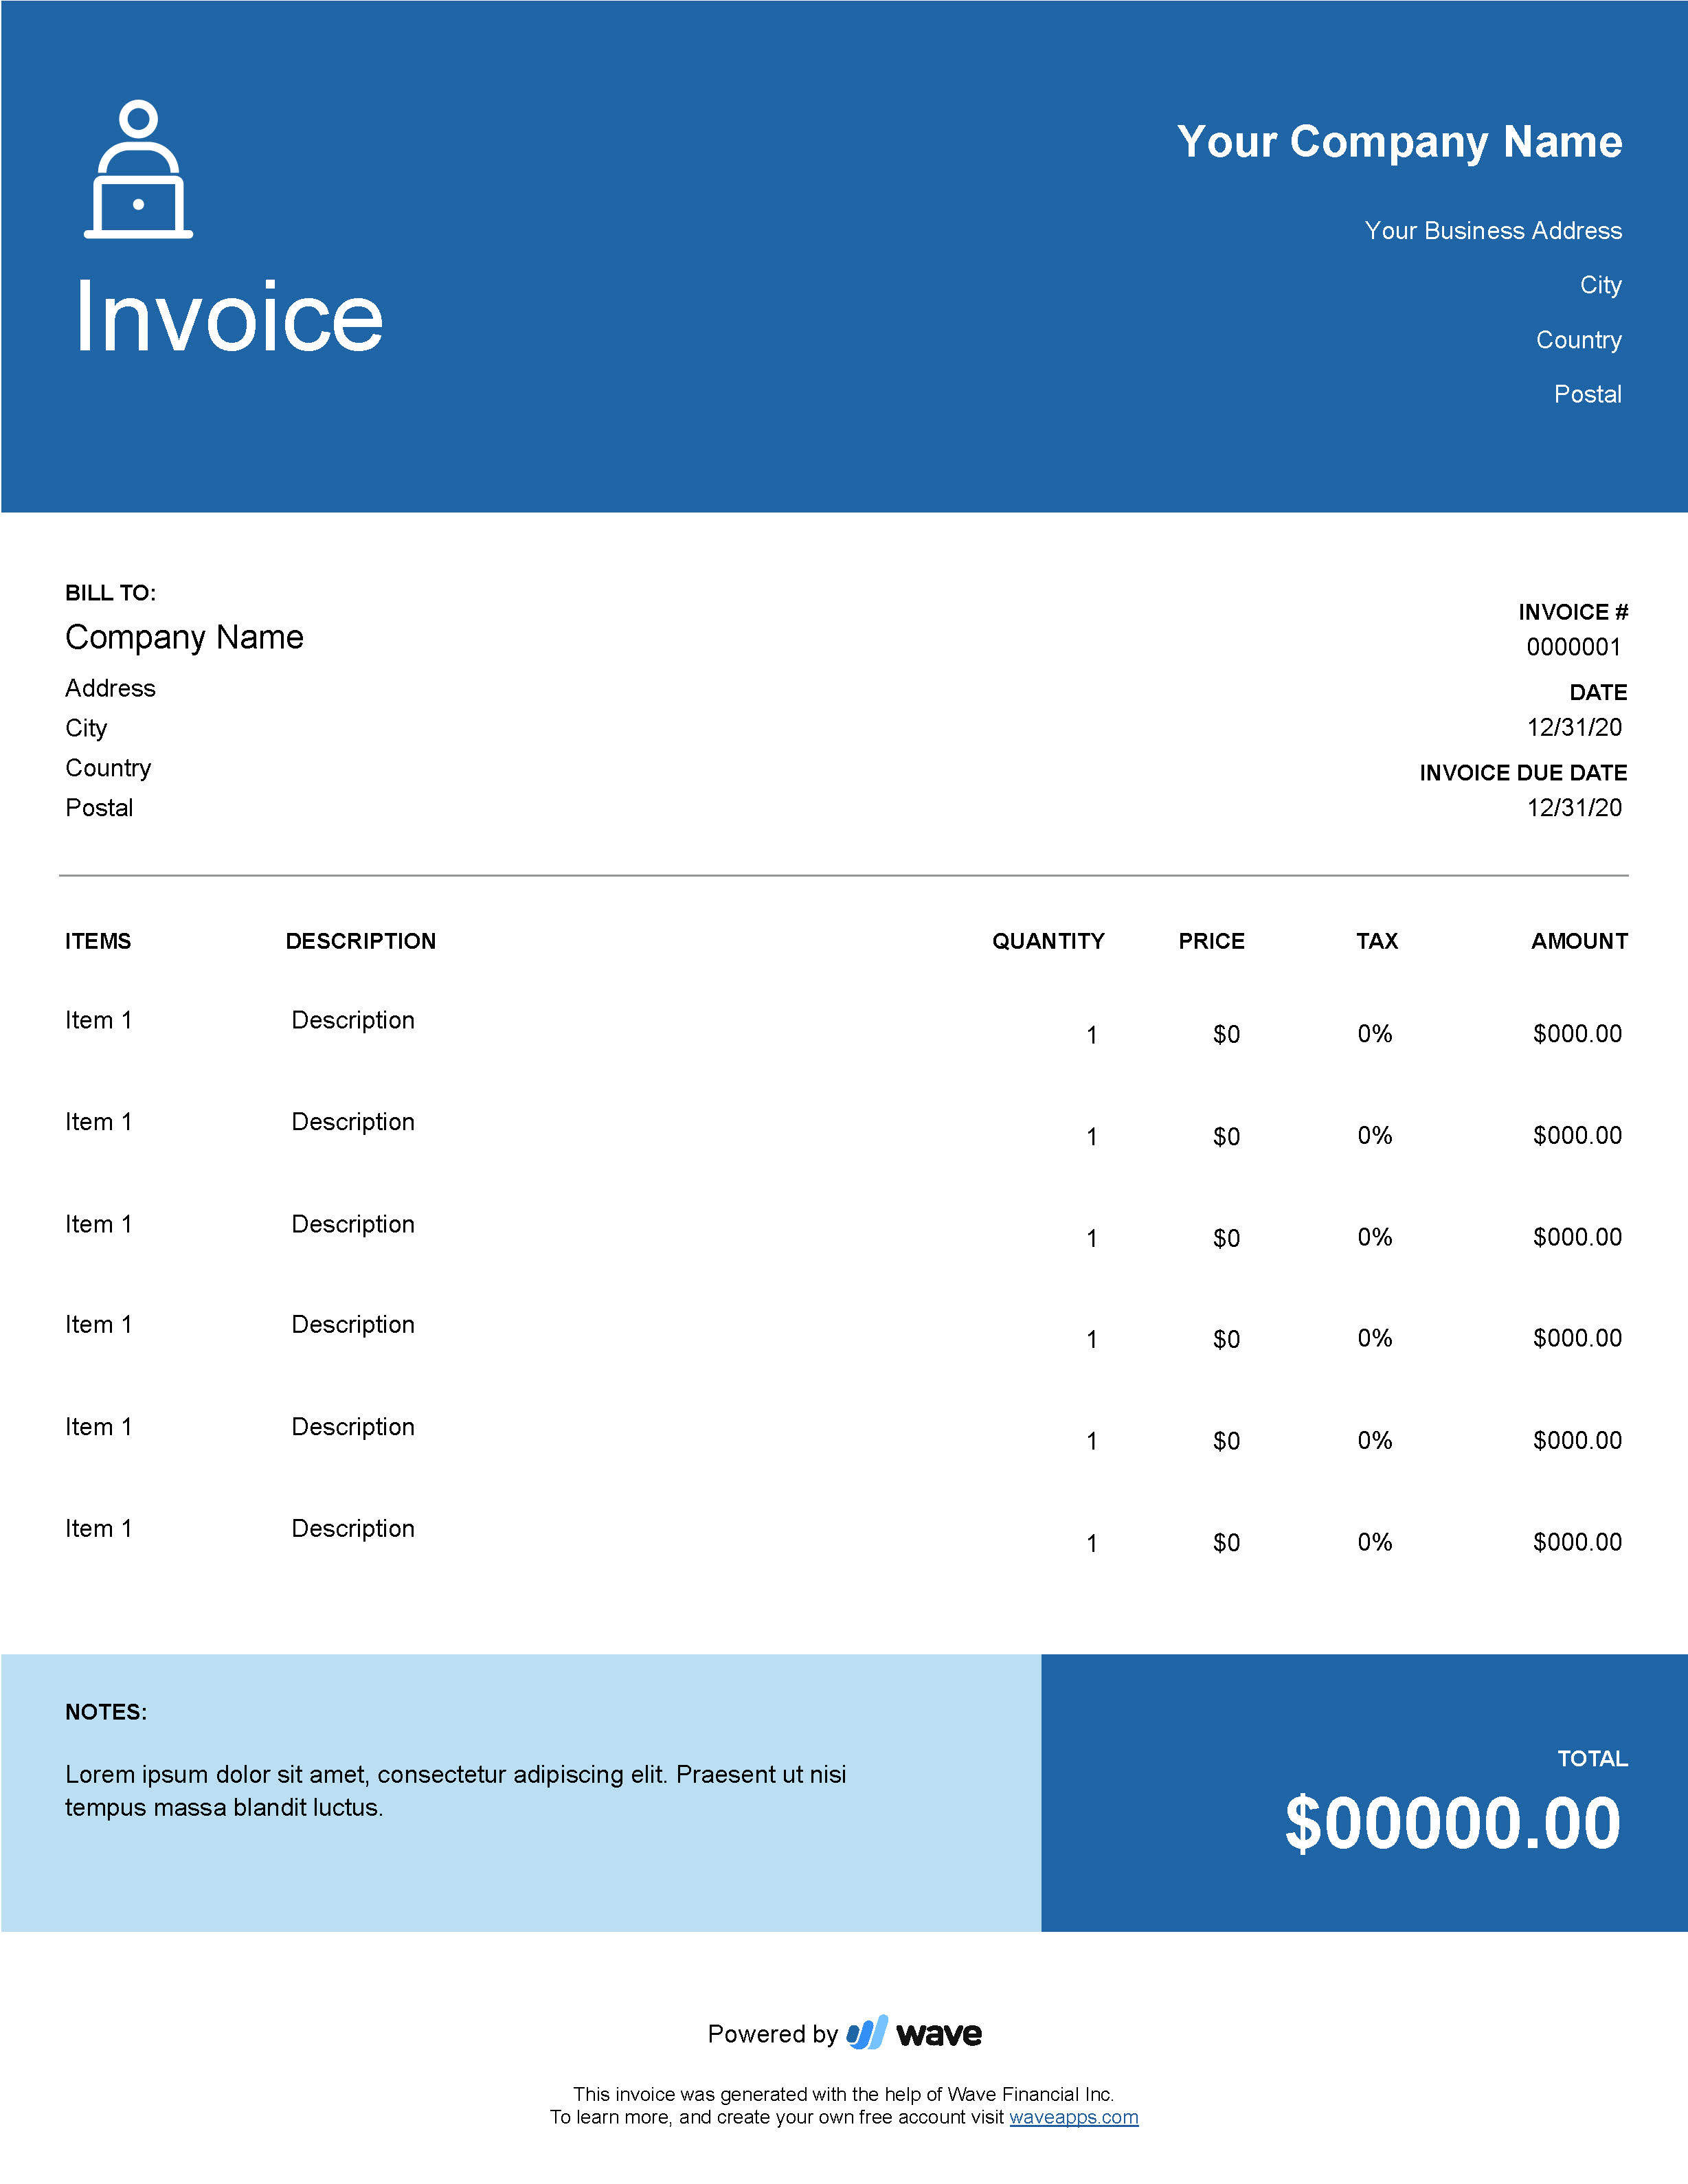 Detail Invoice Template Excel Nomer 25